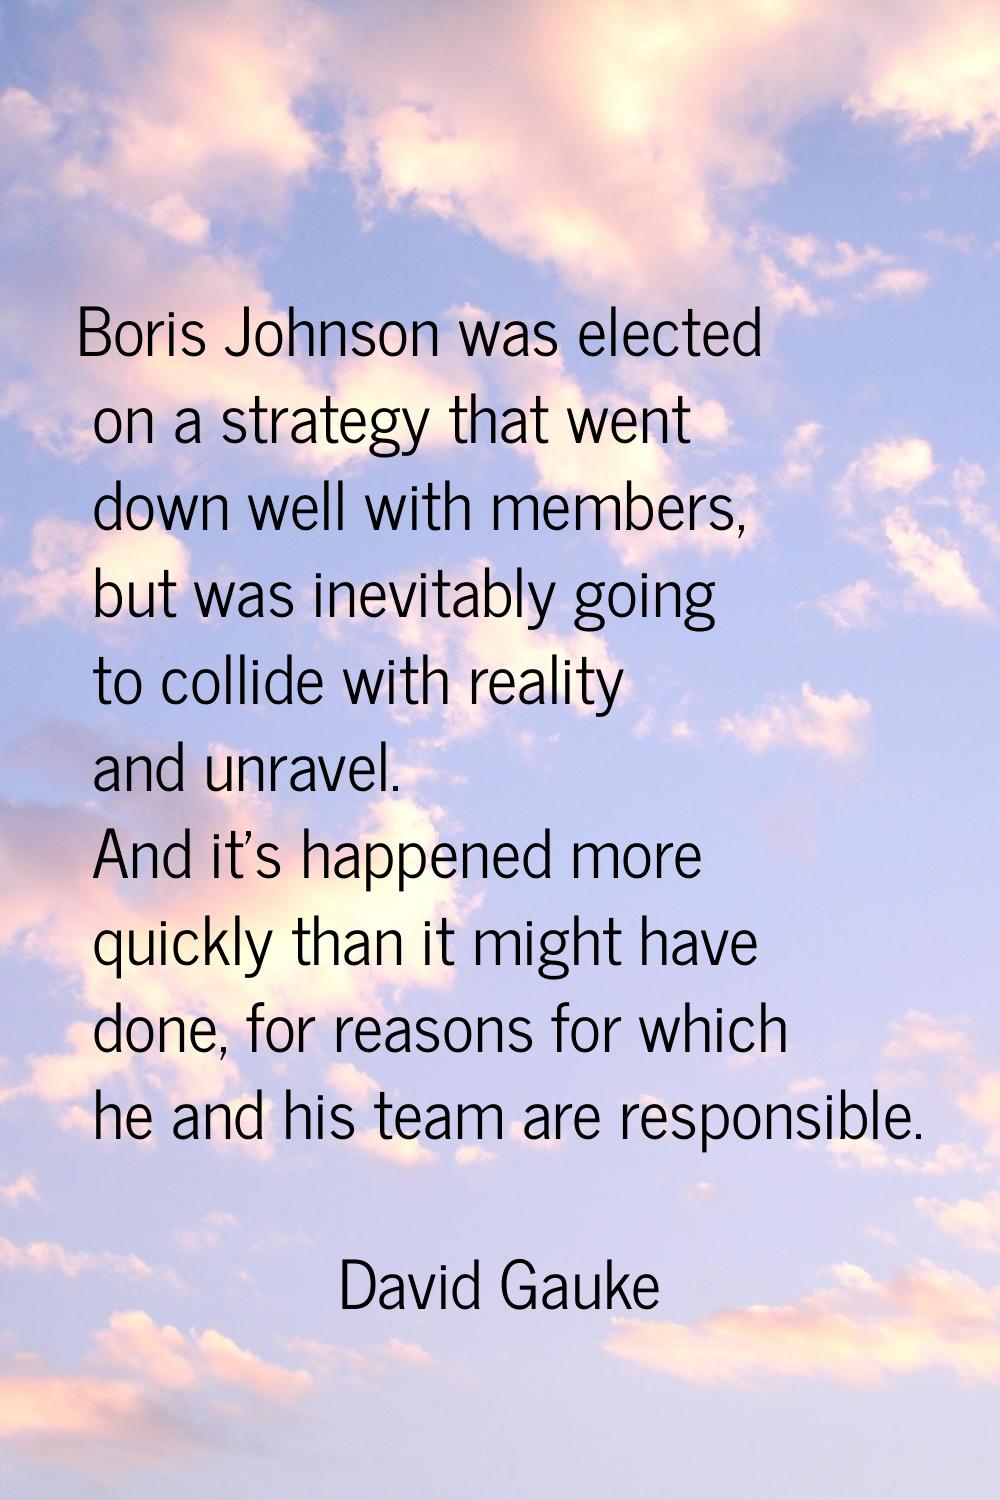 Boris Johnson was elected on a strategy that went down well with members, but was inevitably going 